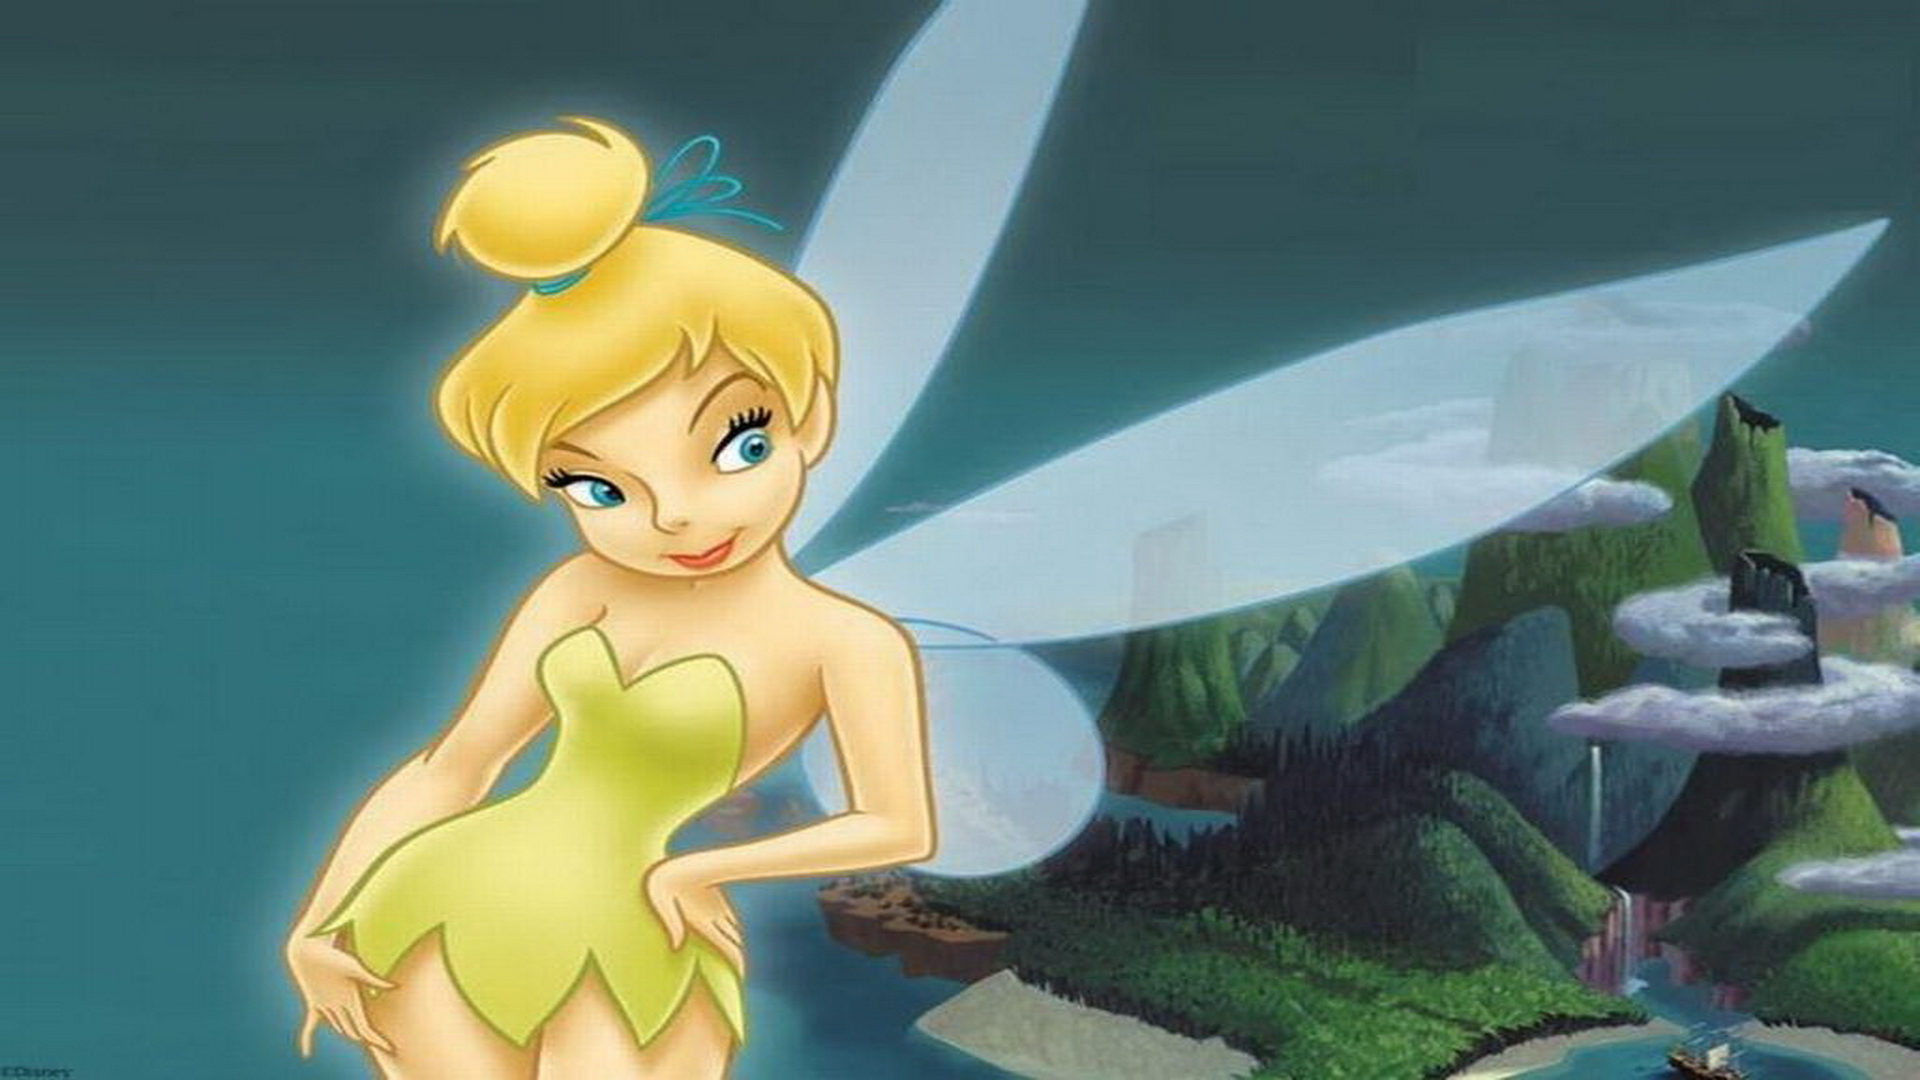 Free download Download Tinker Bell Cake Ideas and Designs [1920x1080 ...